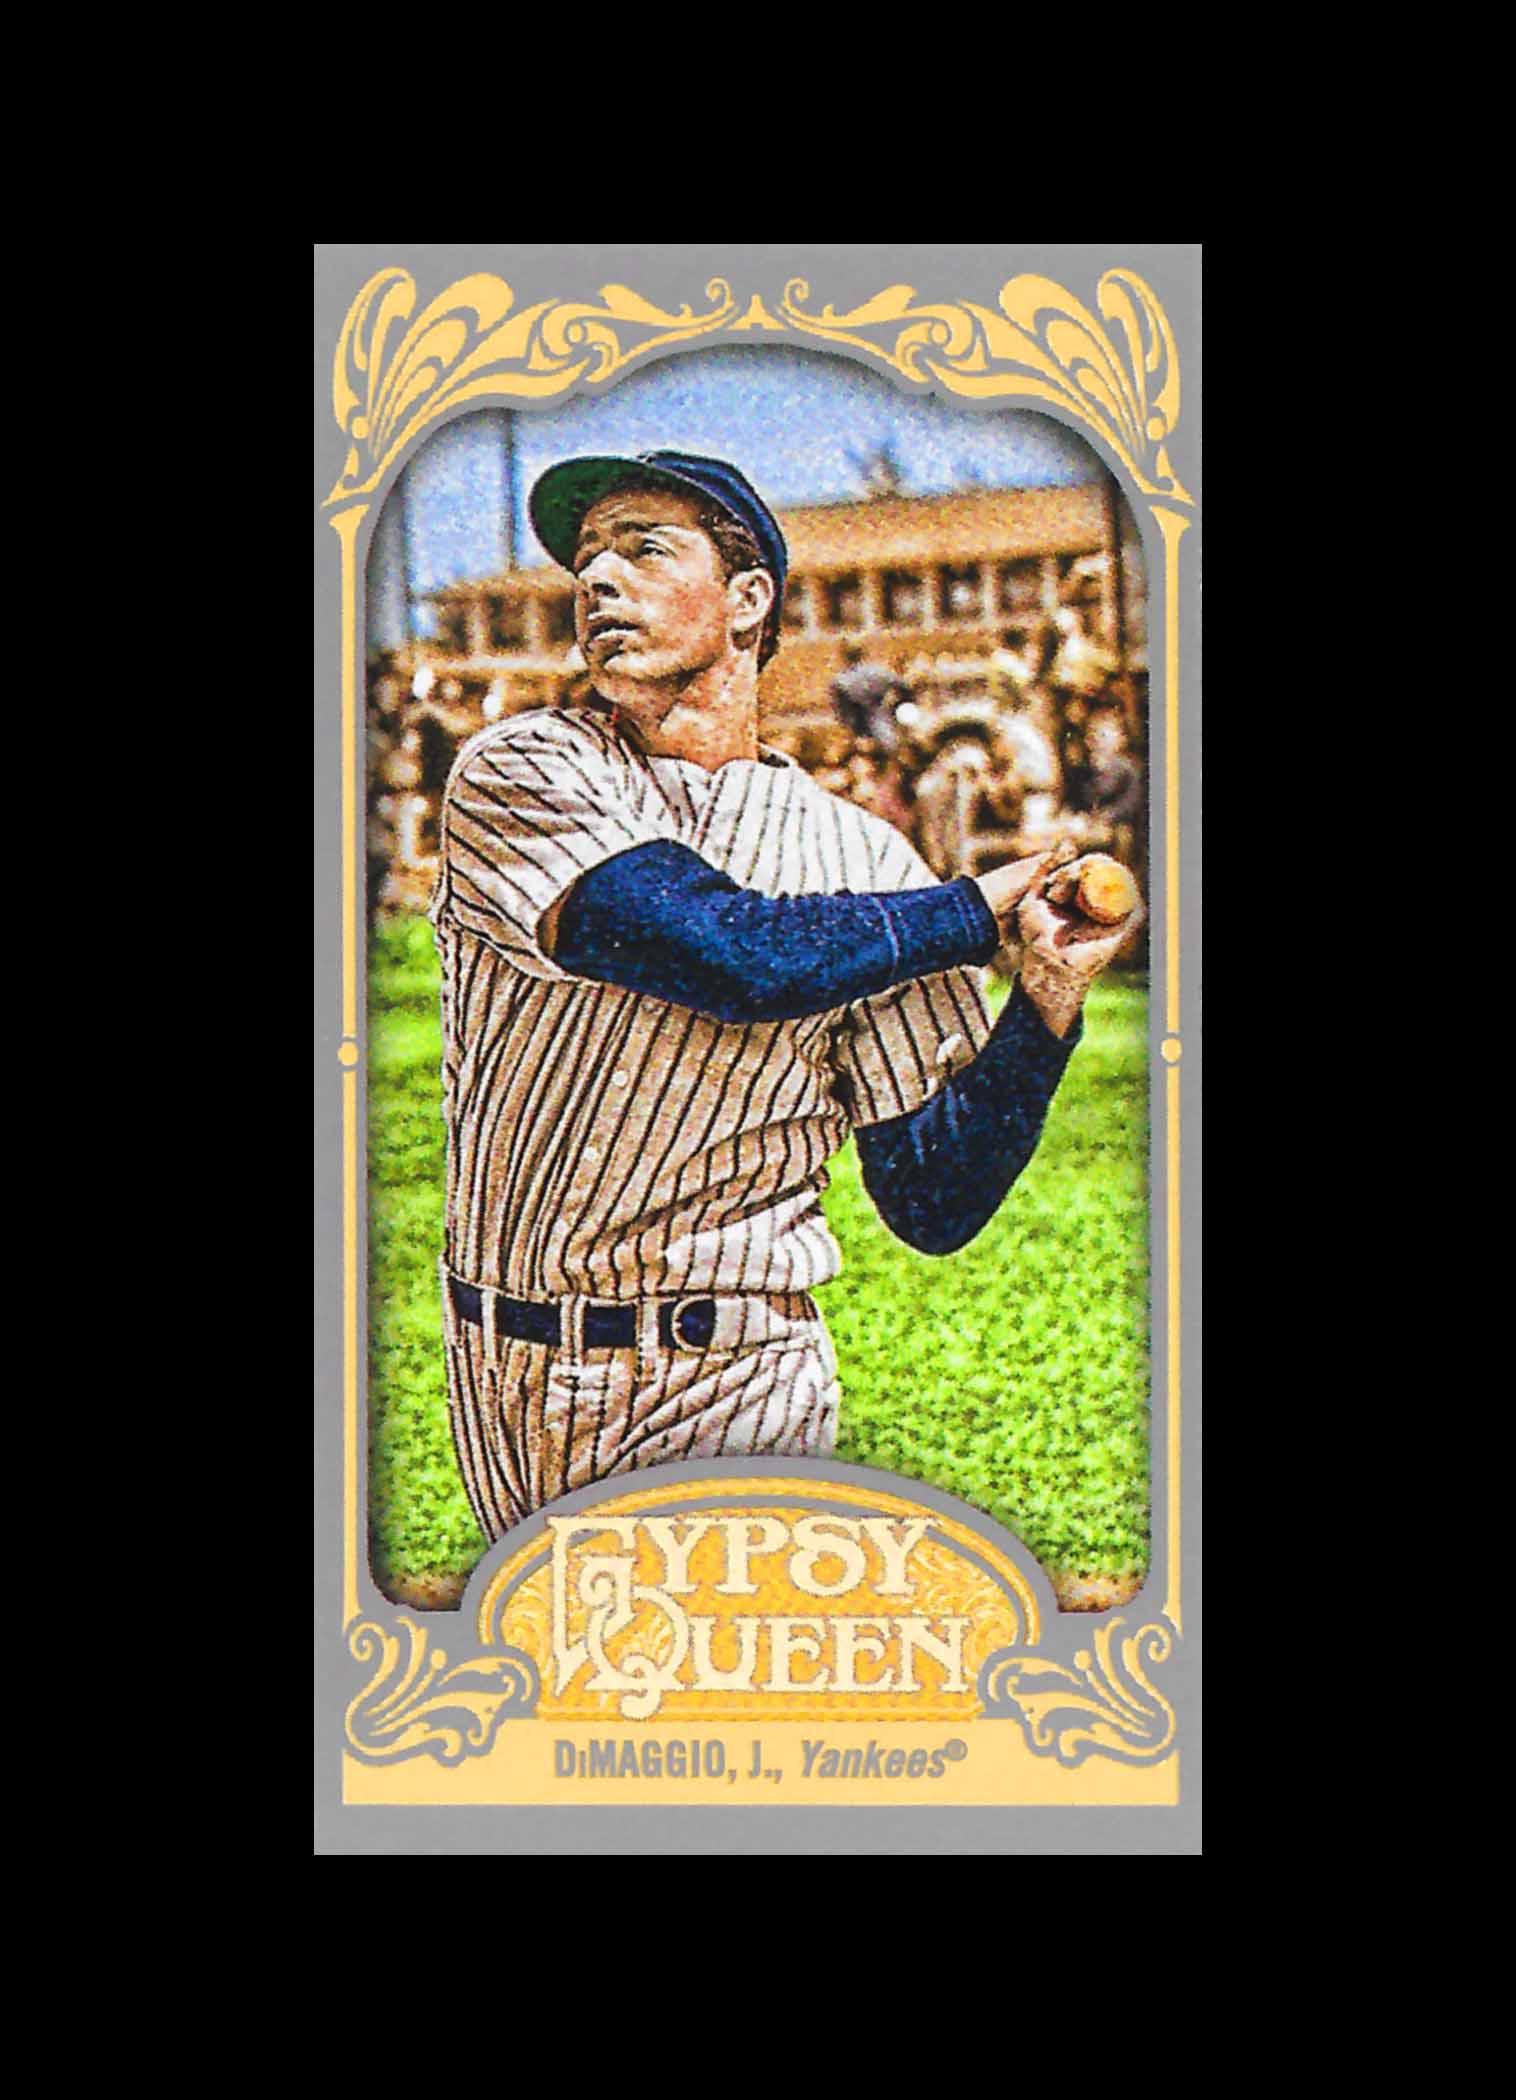 2012 Topps Gypsy Queen Mini Variation